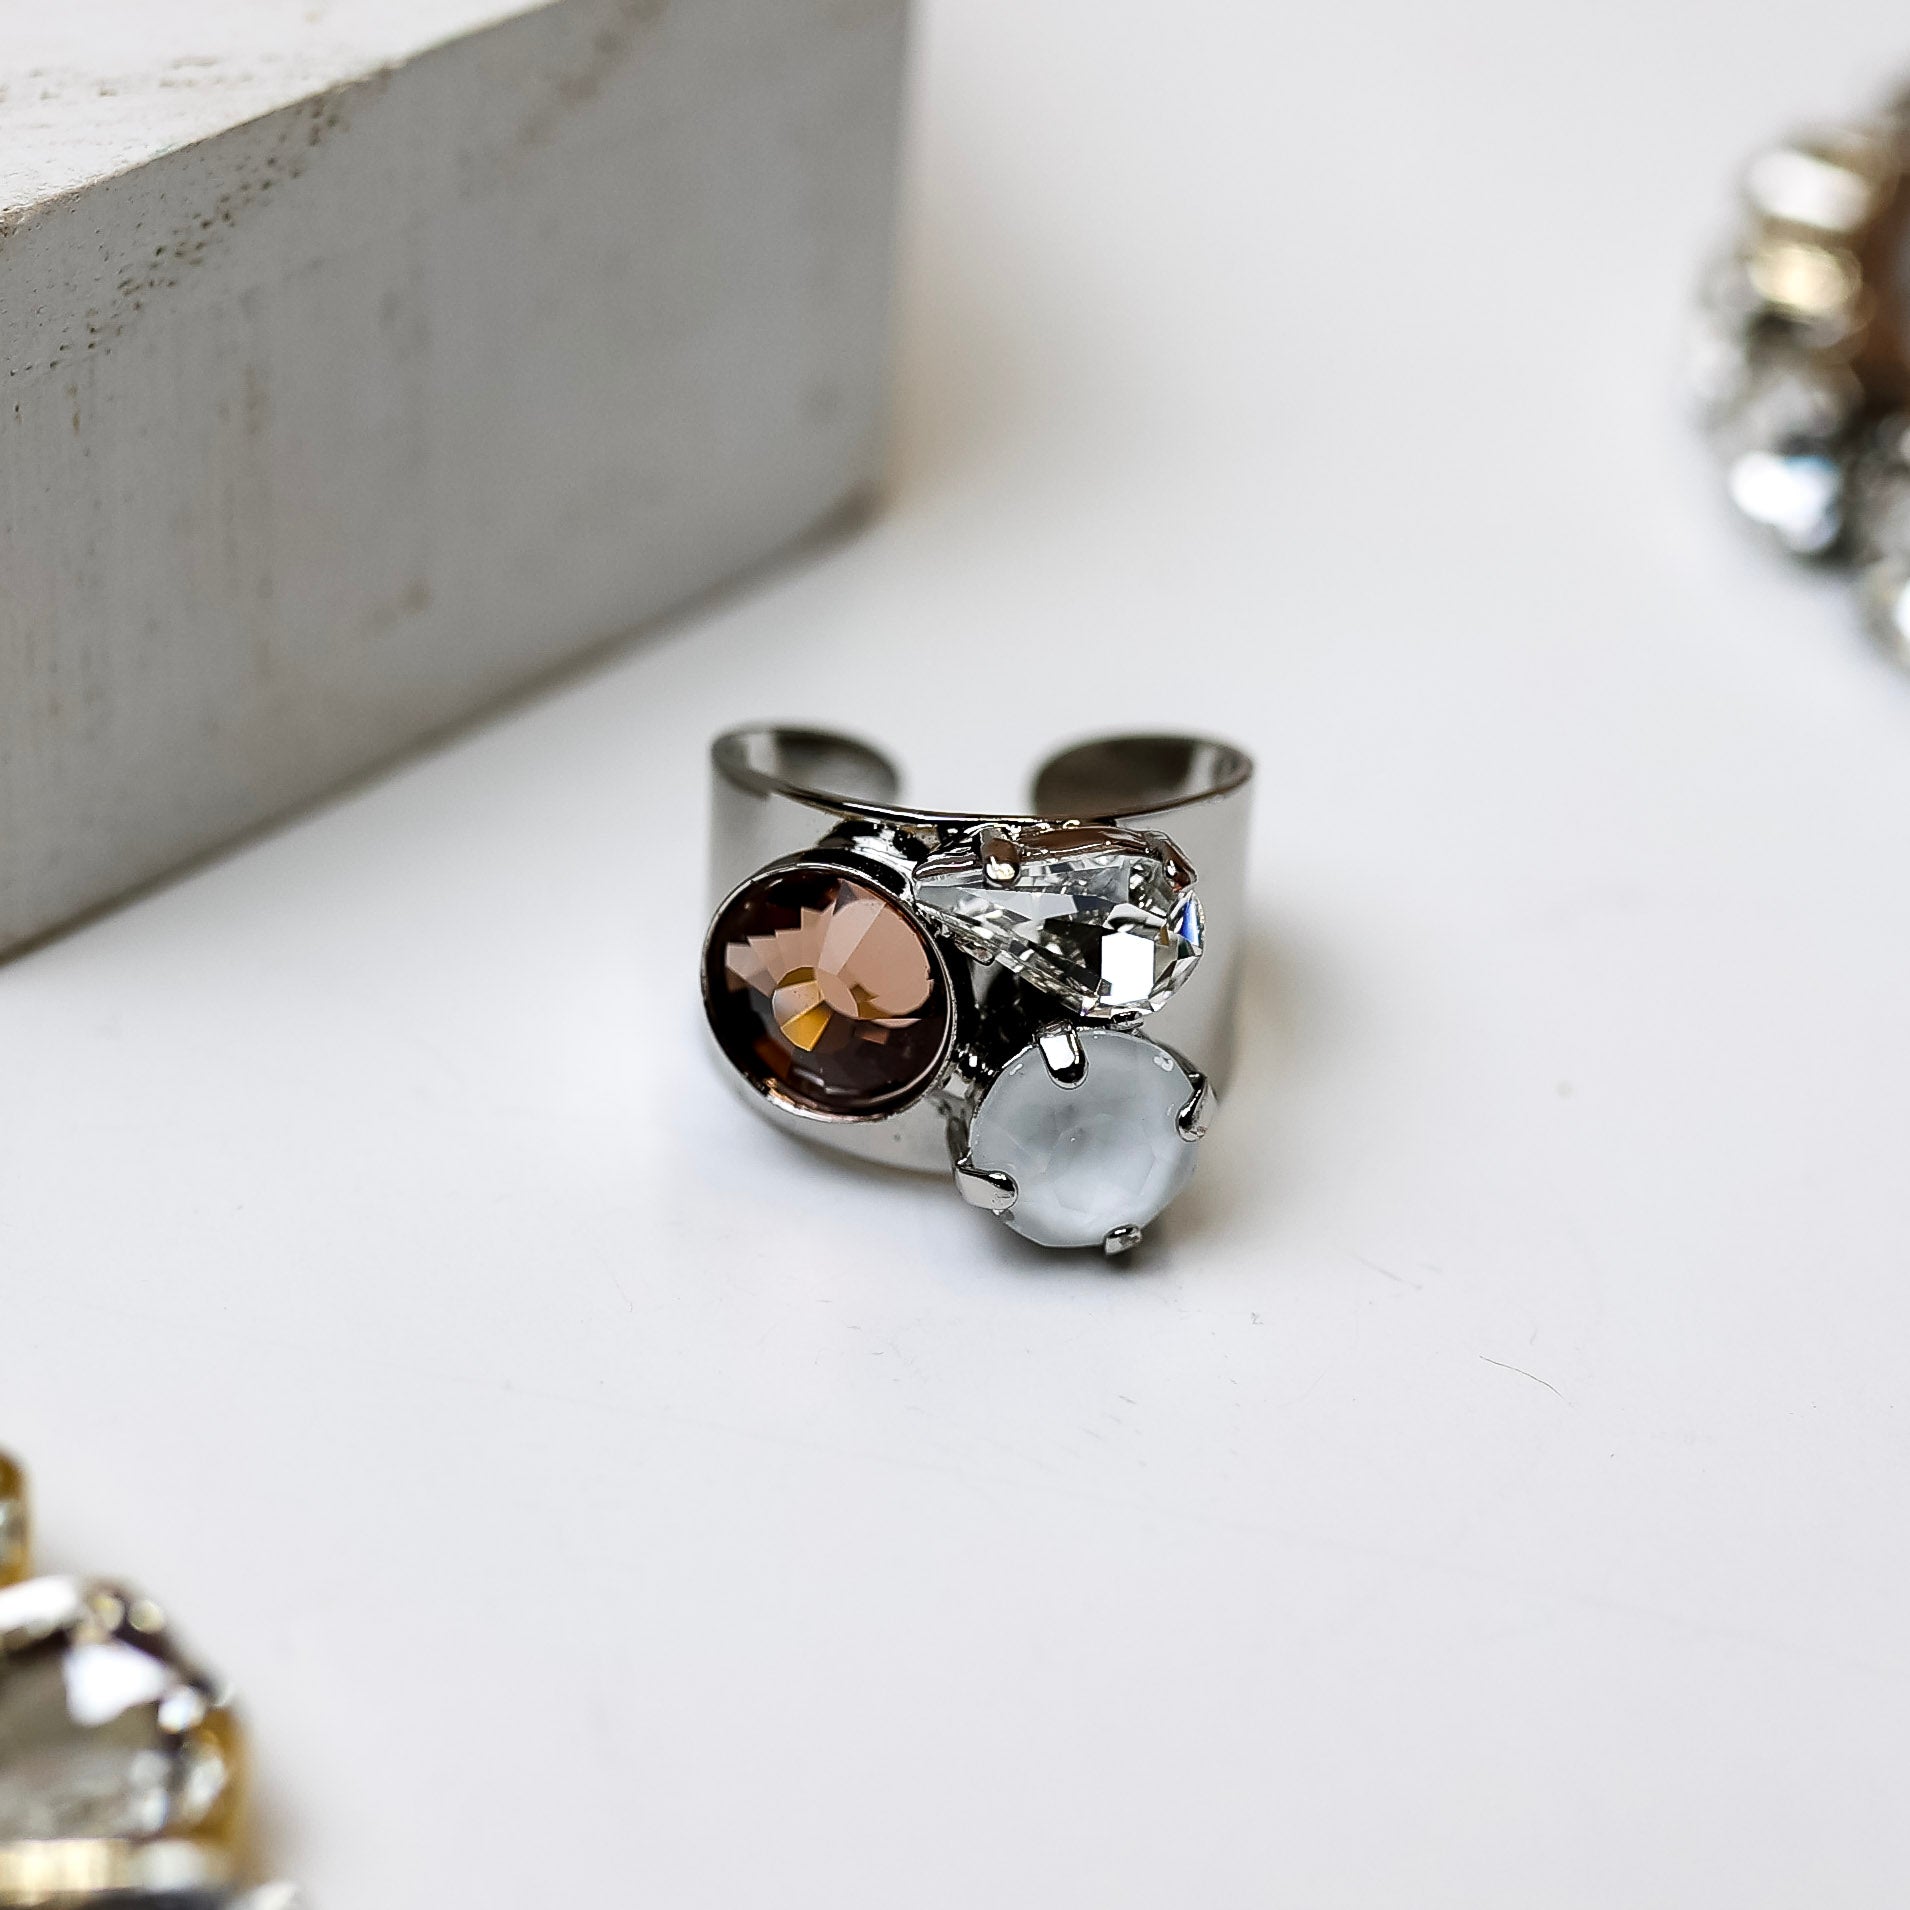 A silver tone adjustable ring with ivory, clear, and topaz crystals pictured on a white background.